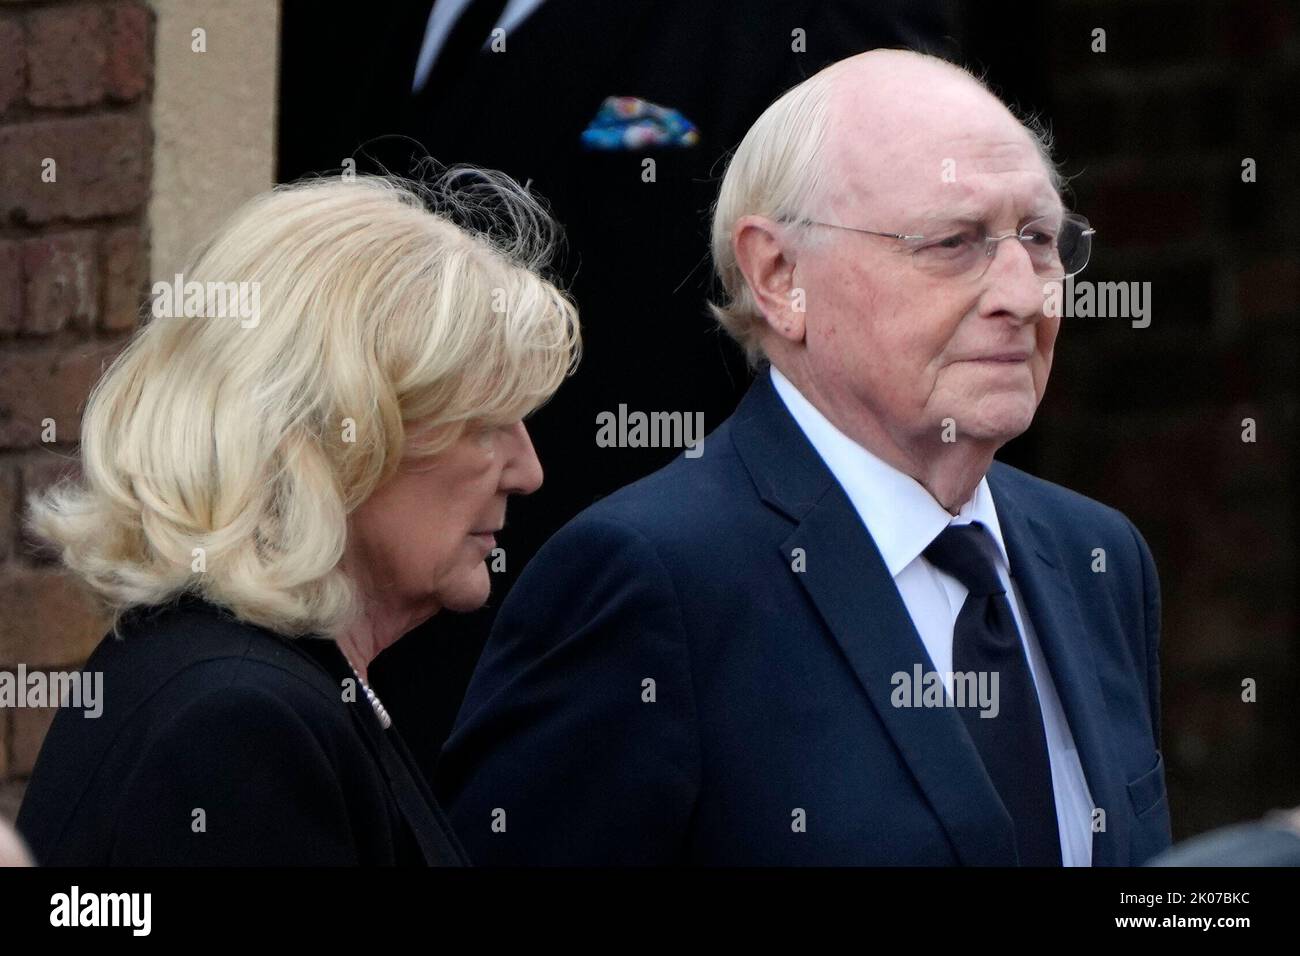 Former Labour Party leader Neil Kinnock leaves St James's Palace in London following the Accession Council ceremony, where King Charles III is formally proclaimed monarch. Charles automatically became King on the death of his mother, but the Accession Council, attended by Privy Councillors, confirms his role. Picture date: Saturday September 10, 2022. Stock Photo